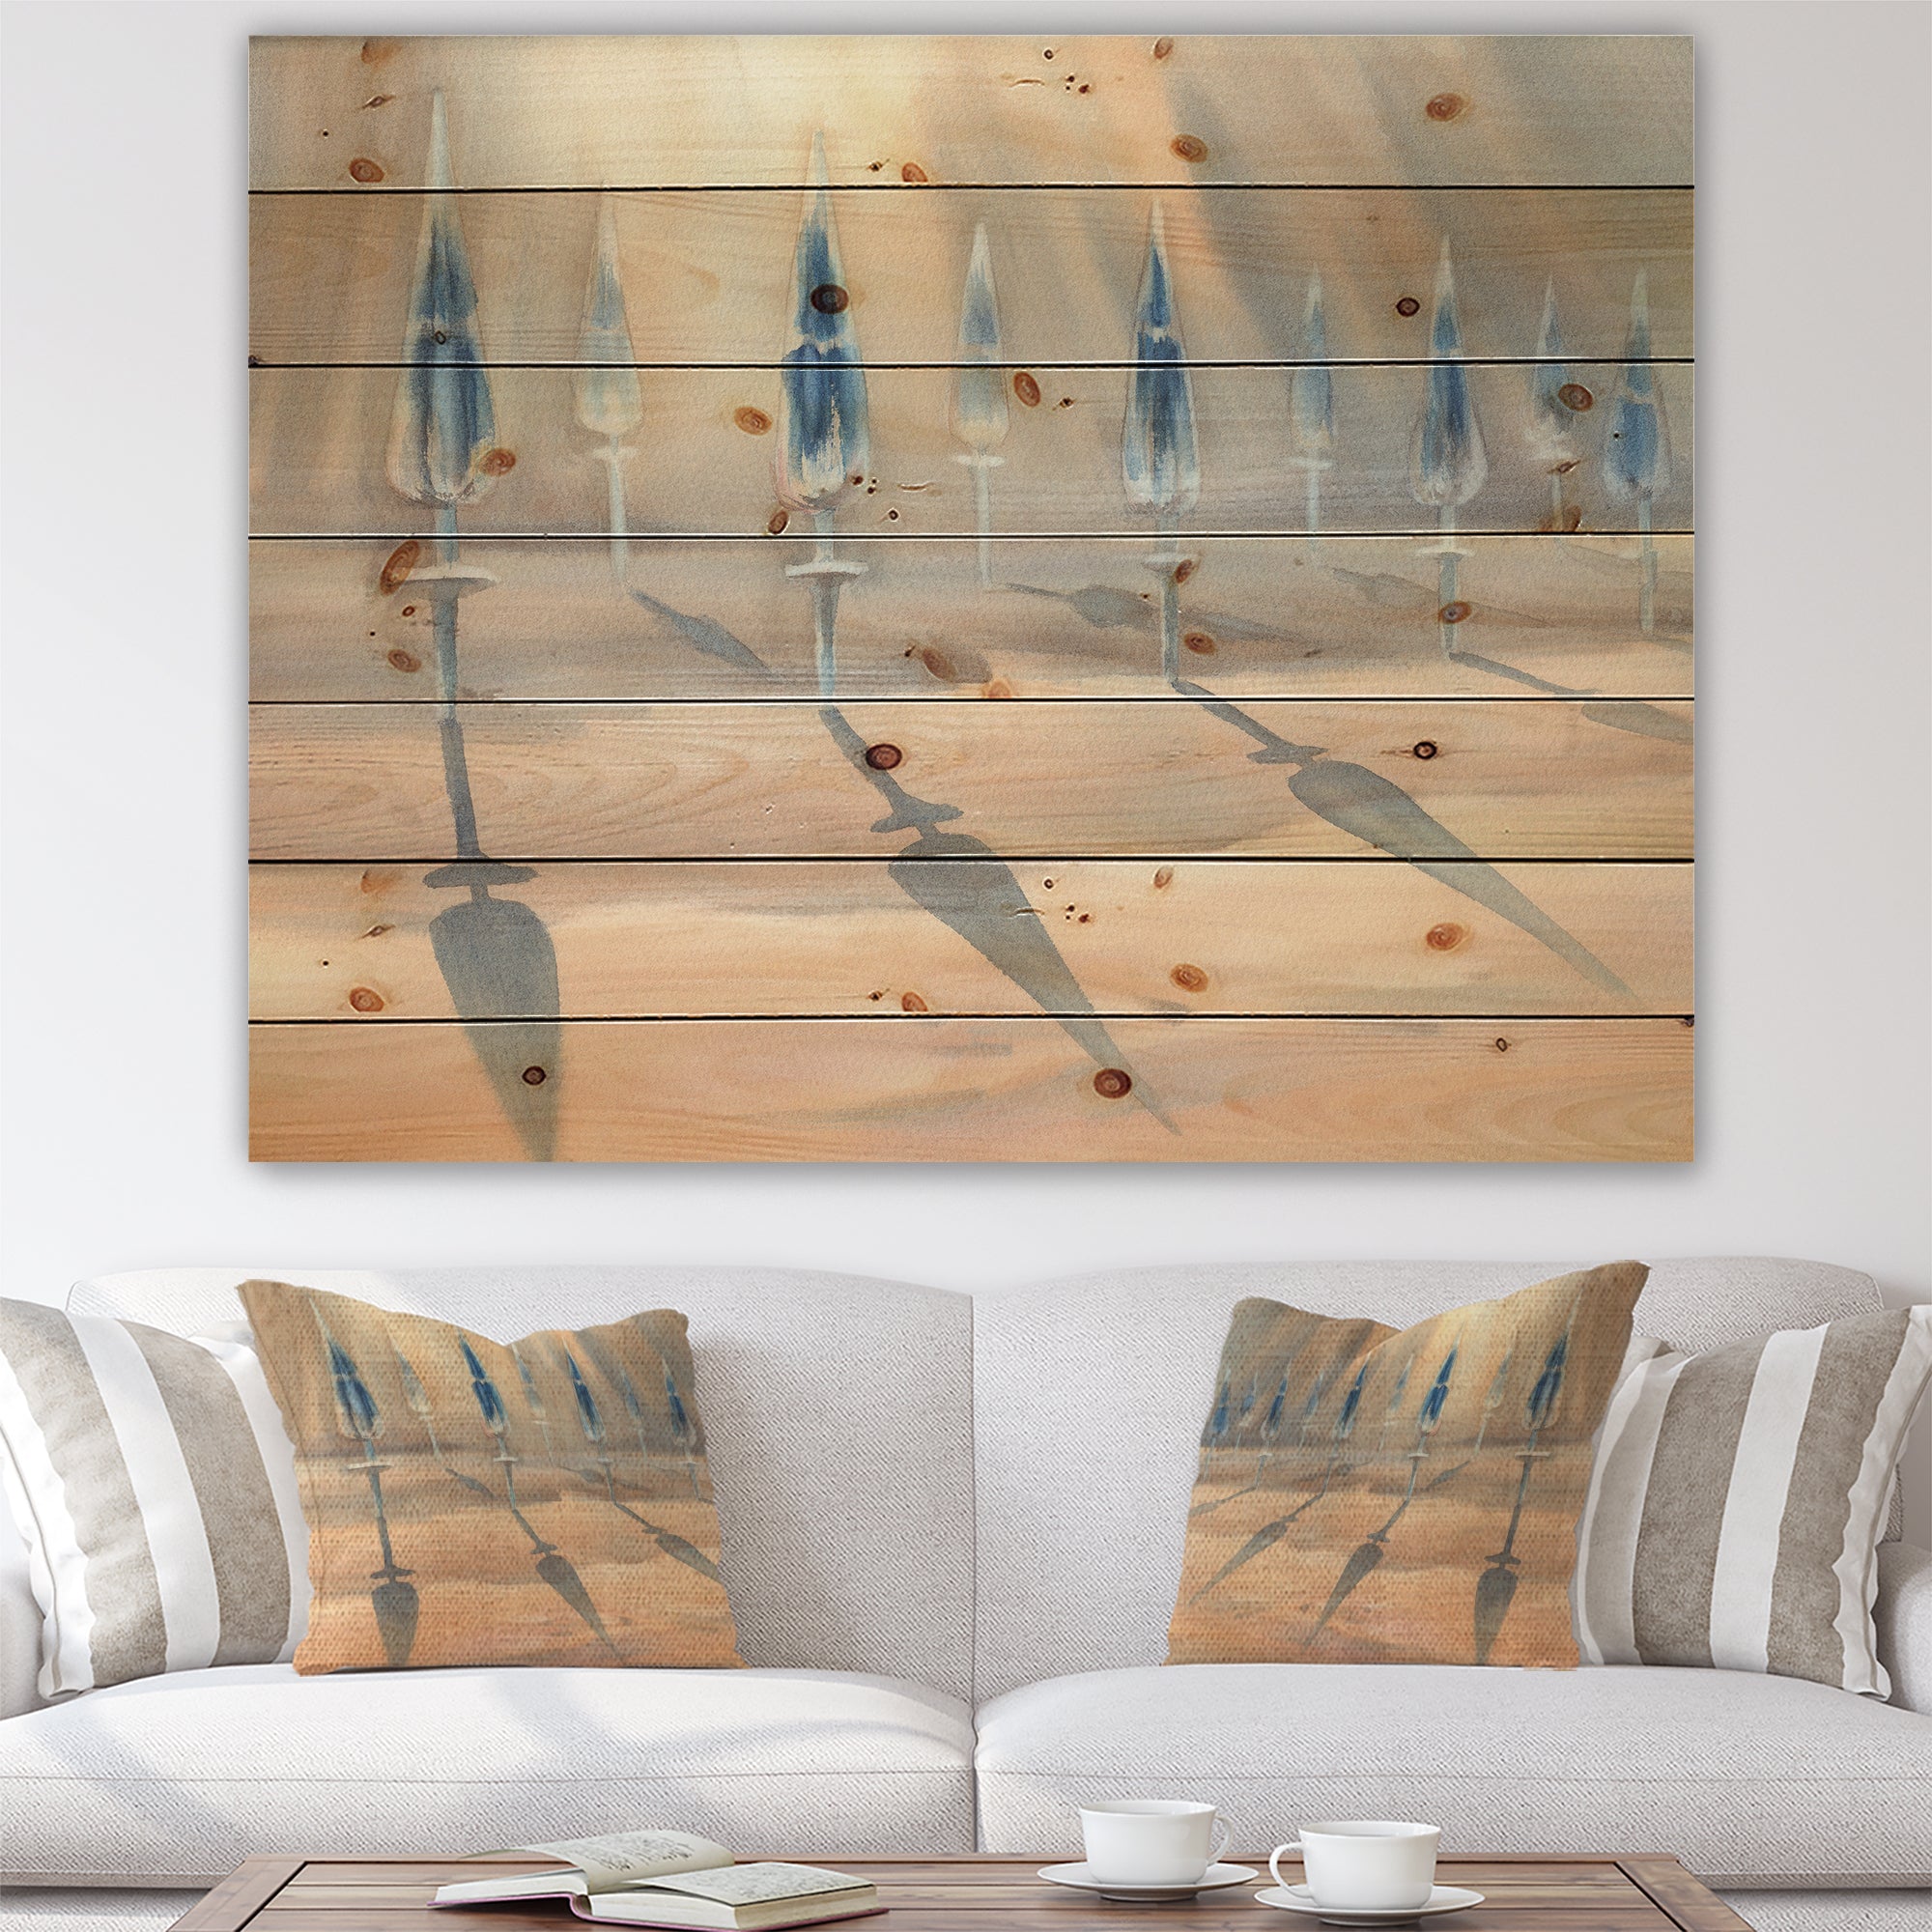 Sunny Sand With Closed Blue Beach Umbrellas - Lake House Print on Natural Pine Wood